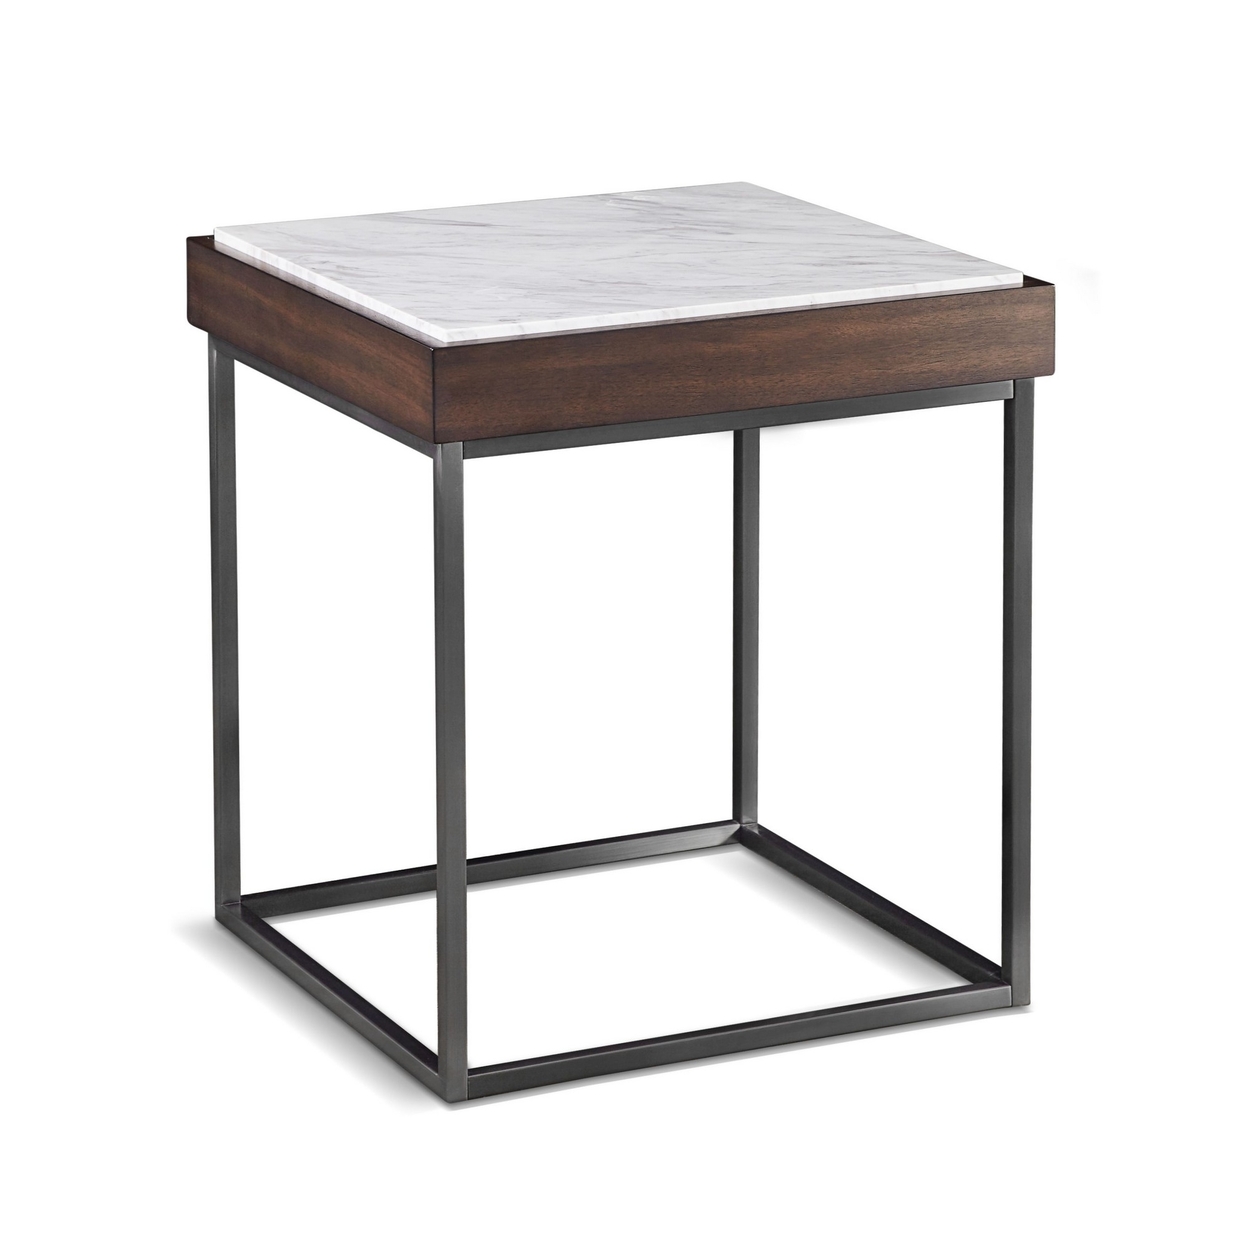 22 Inches Marble Top End Table With Tubular Legs, White And Brown- Saltoro Sherpi